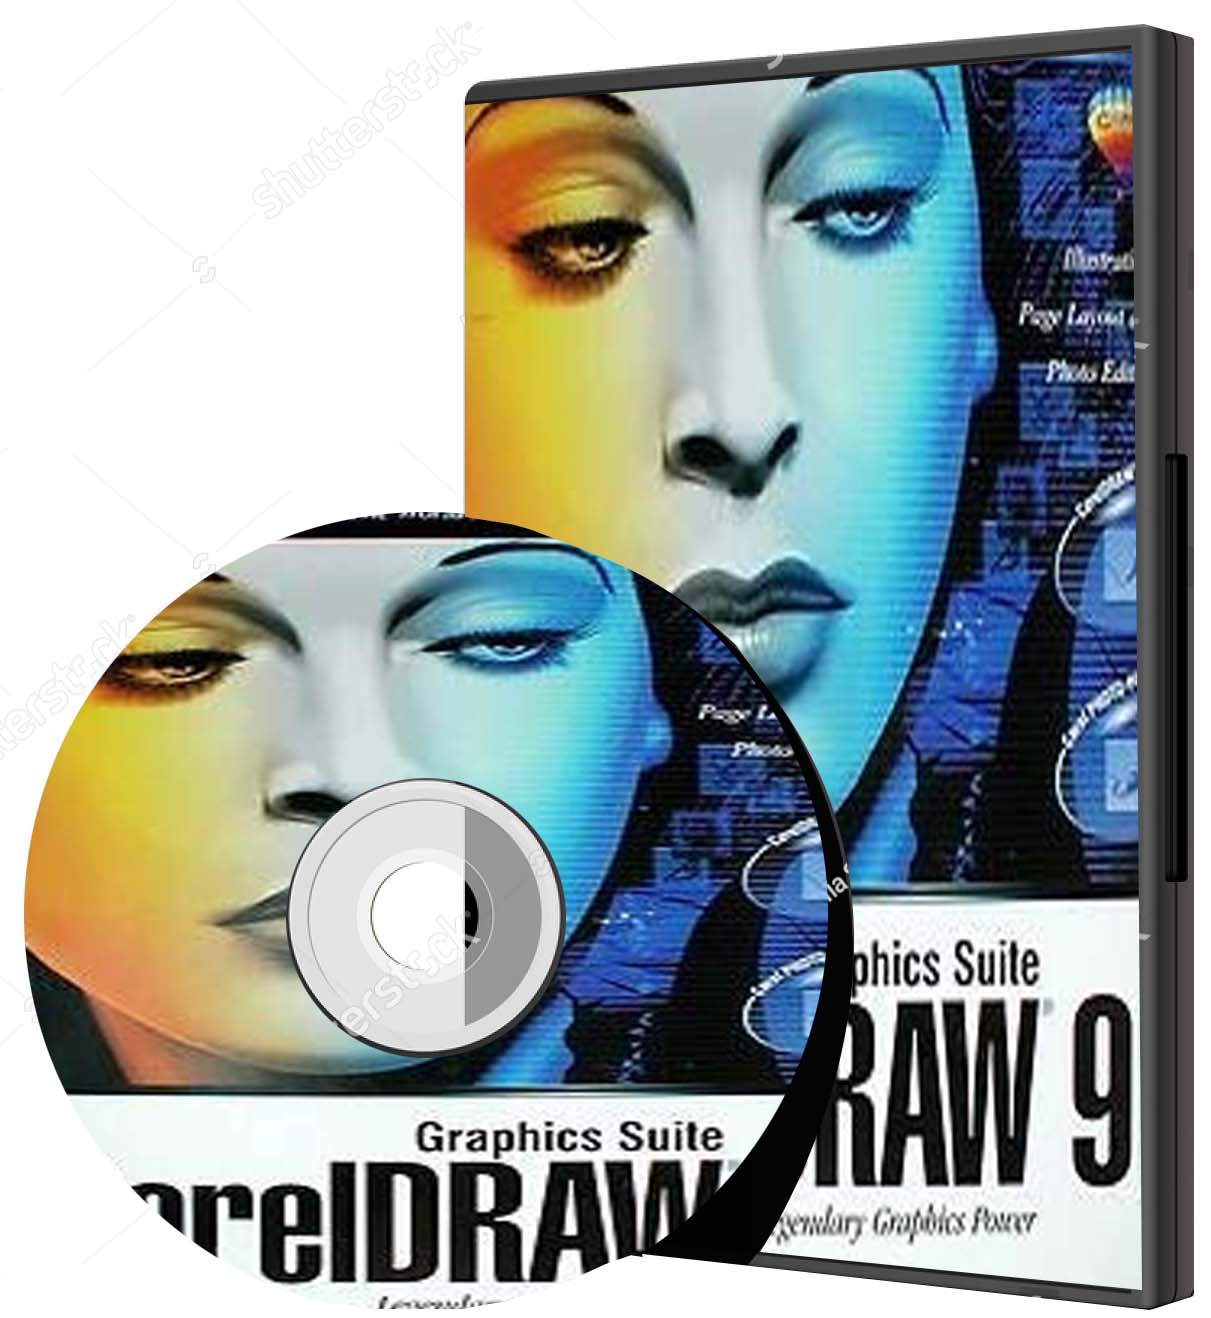 coreldraw 9 free download full version with crack